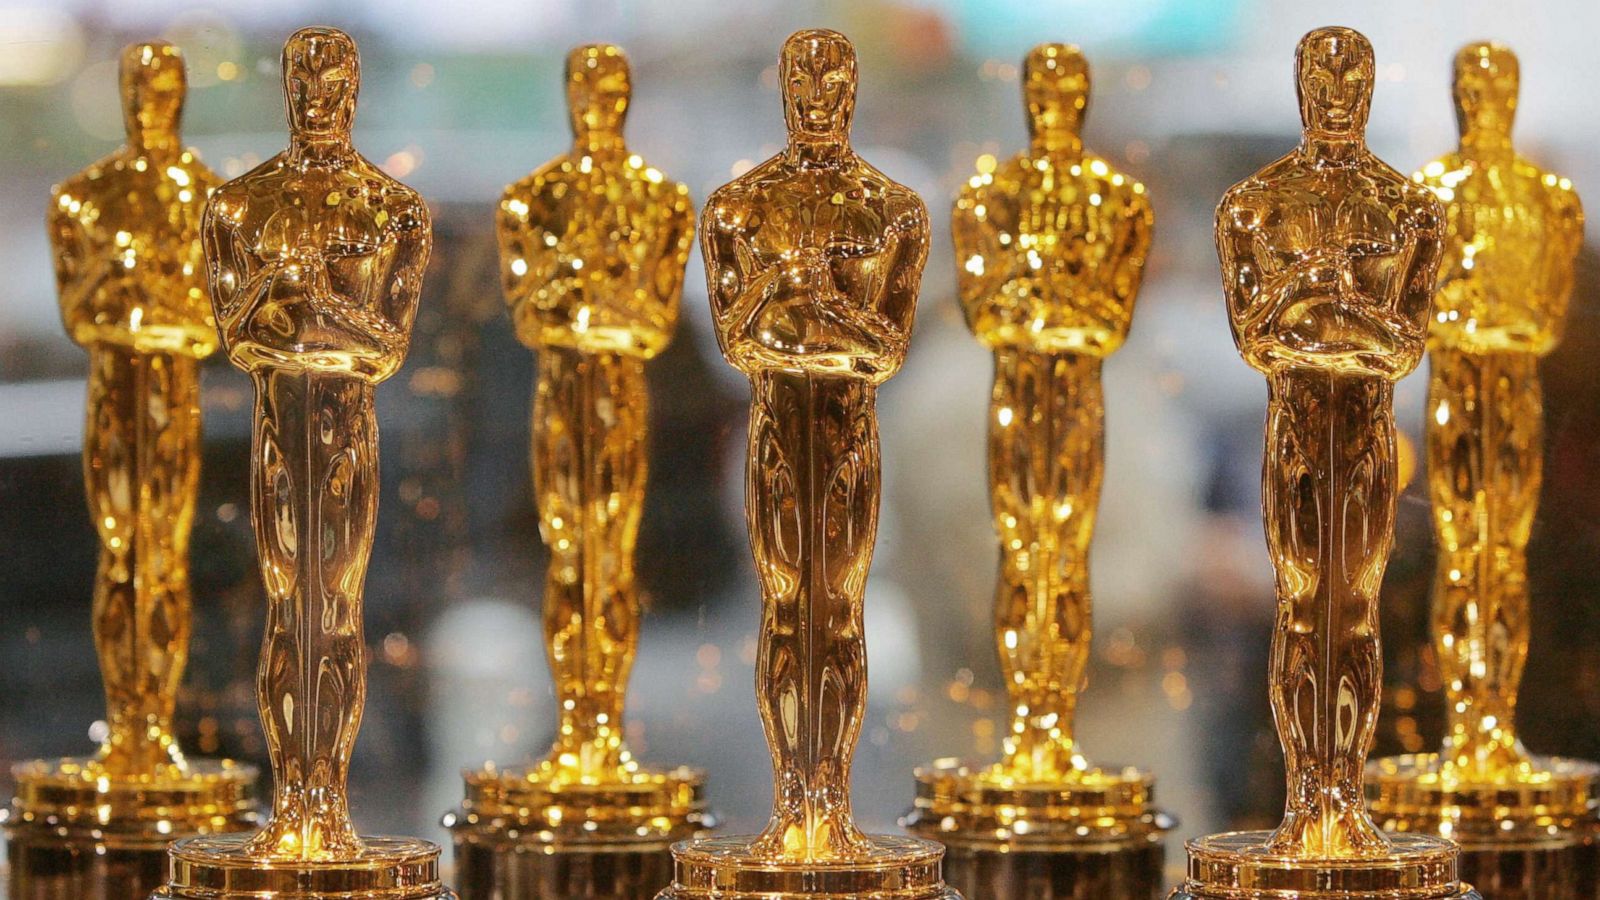 Guide to the Oscars: 94th Academy Awards winners, fashion